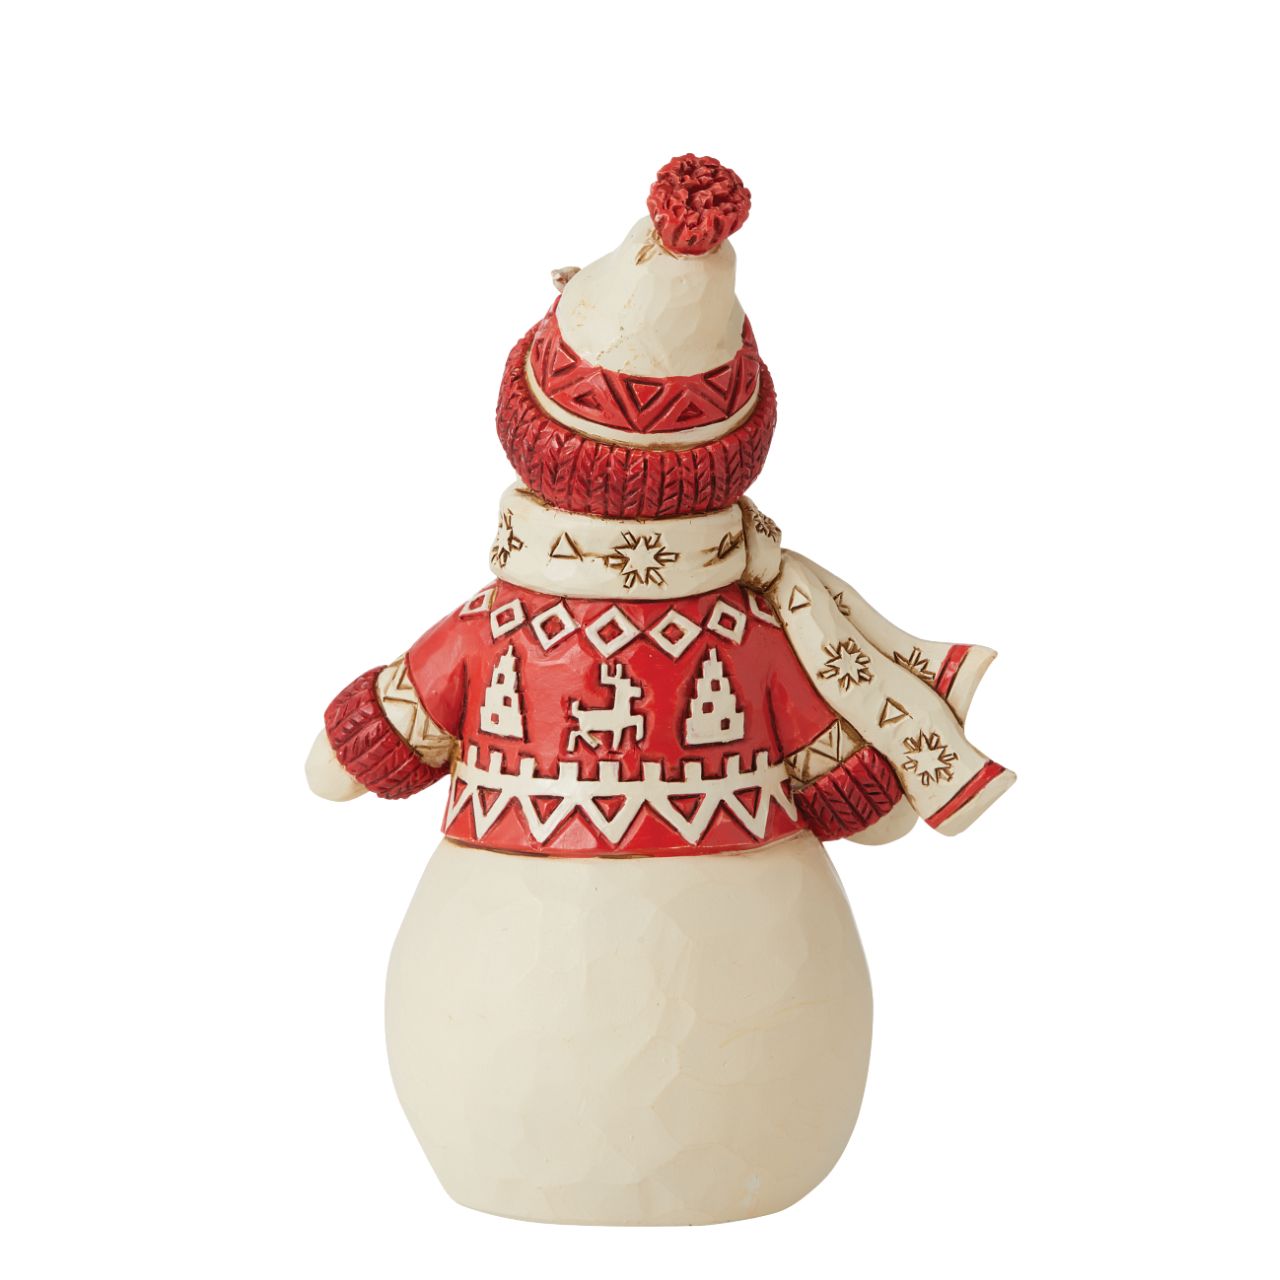 Jim Shore Nordic Noel Collection Snowman Figurine  The Nordic Noel Collection showcases a modern twist on Jim Shores whimsical designs; Contrasting red and white colours in Scandinavian patterns, turkey red and Danish architectural trim.